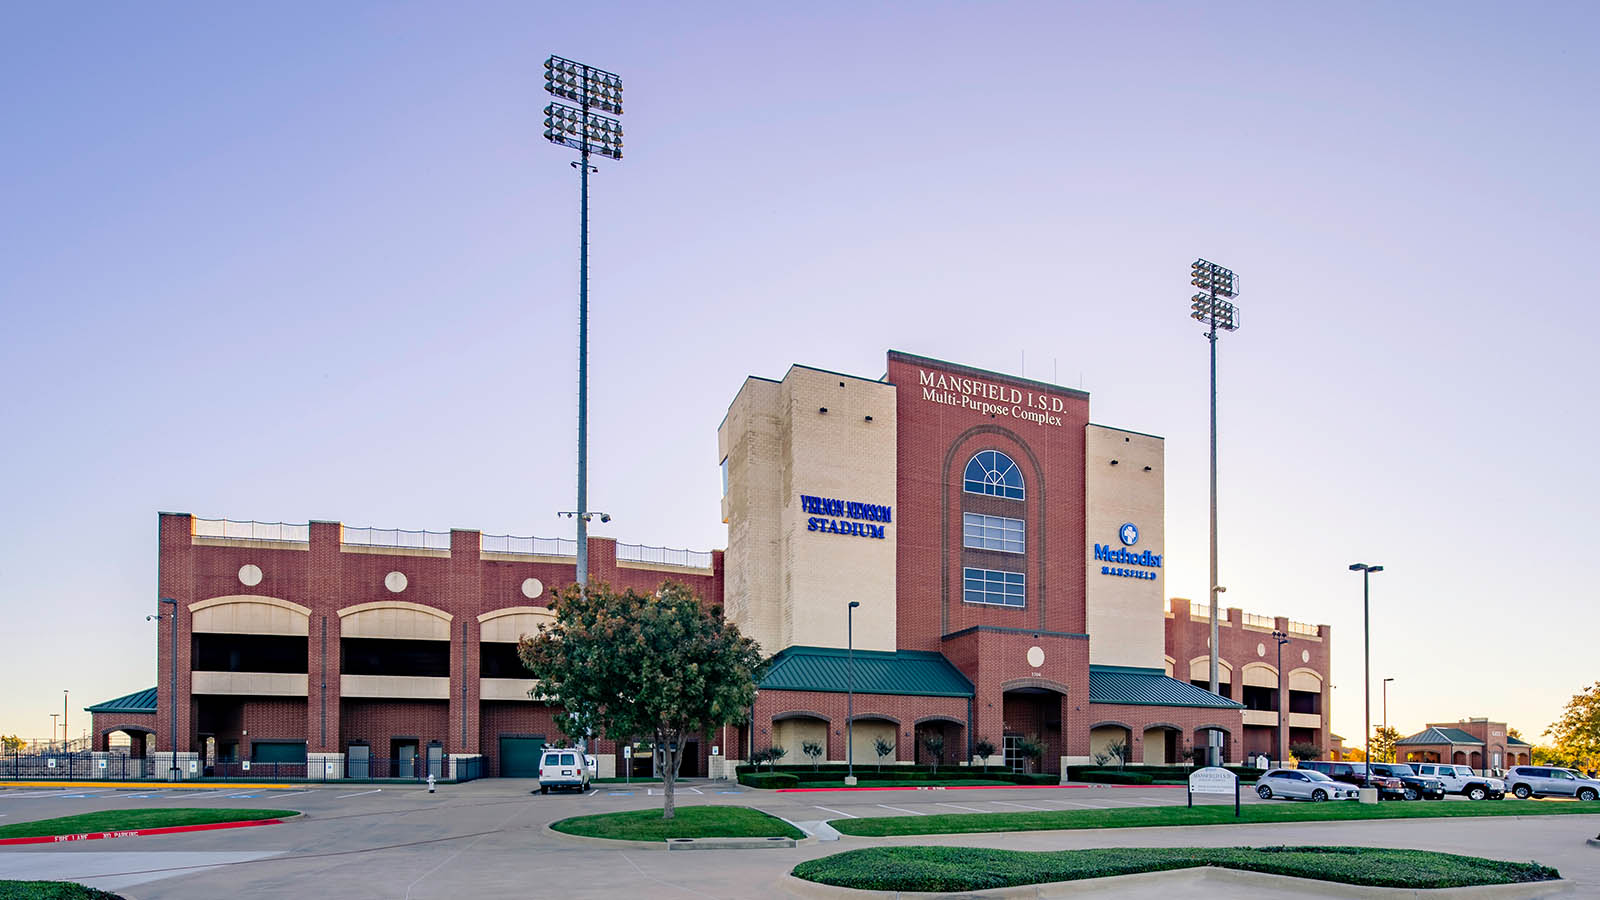 Verson Newsom Stadium, built in 2006, as well as R.L. Anderson Stadium will receive renovations and turf replacements should voters approve the $777 million bond. Huckabee Inc.